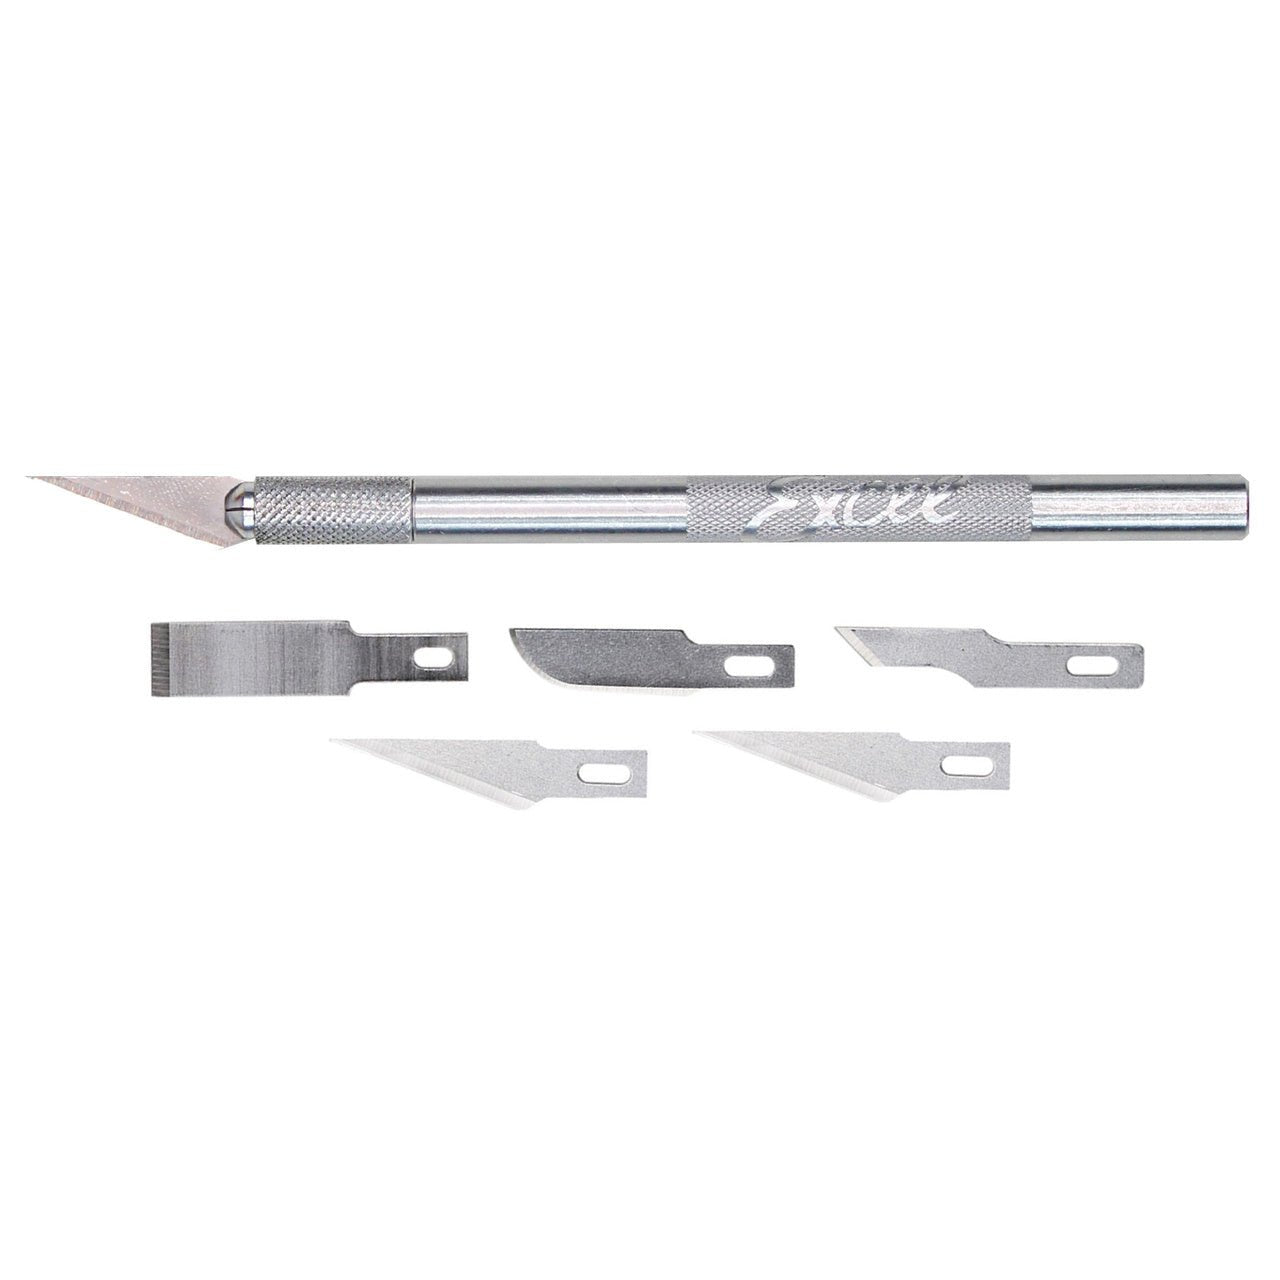 X-Acto Knife Combo - Includes Handle, # 11 Blade and Cap